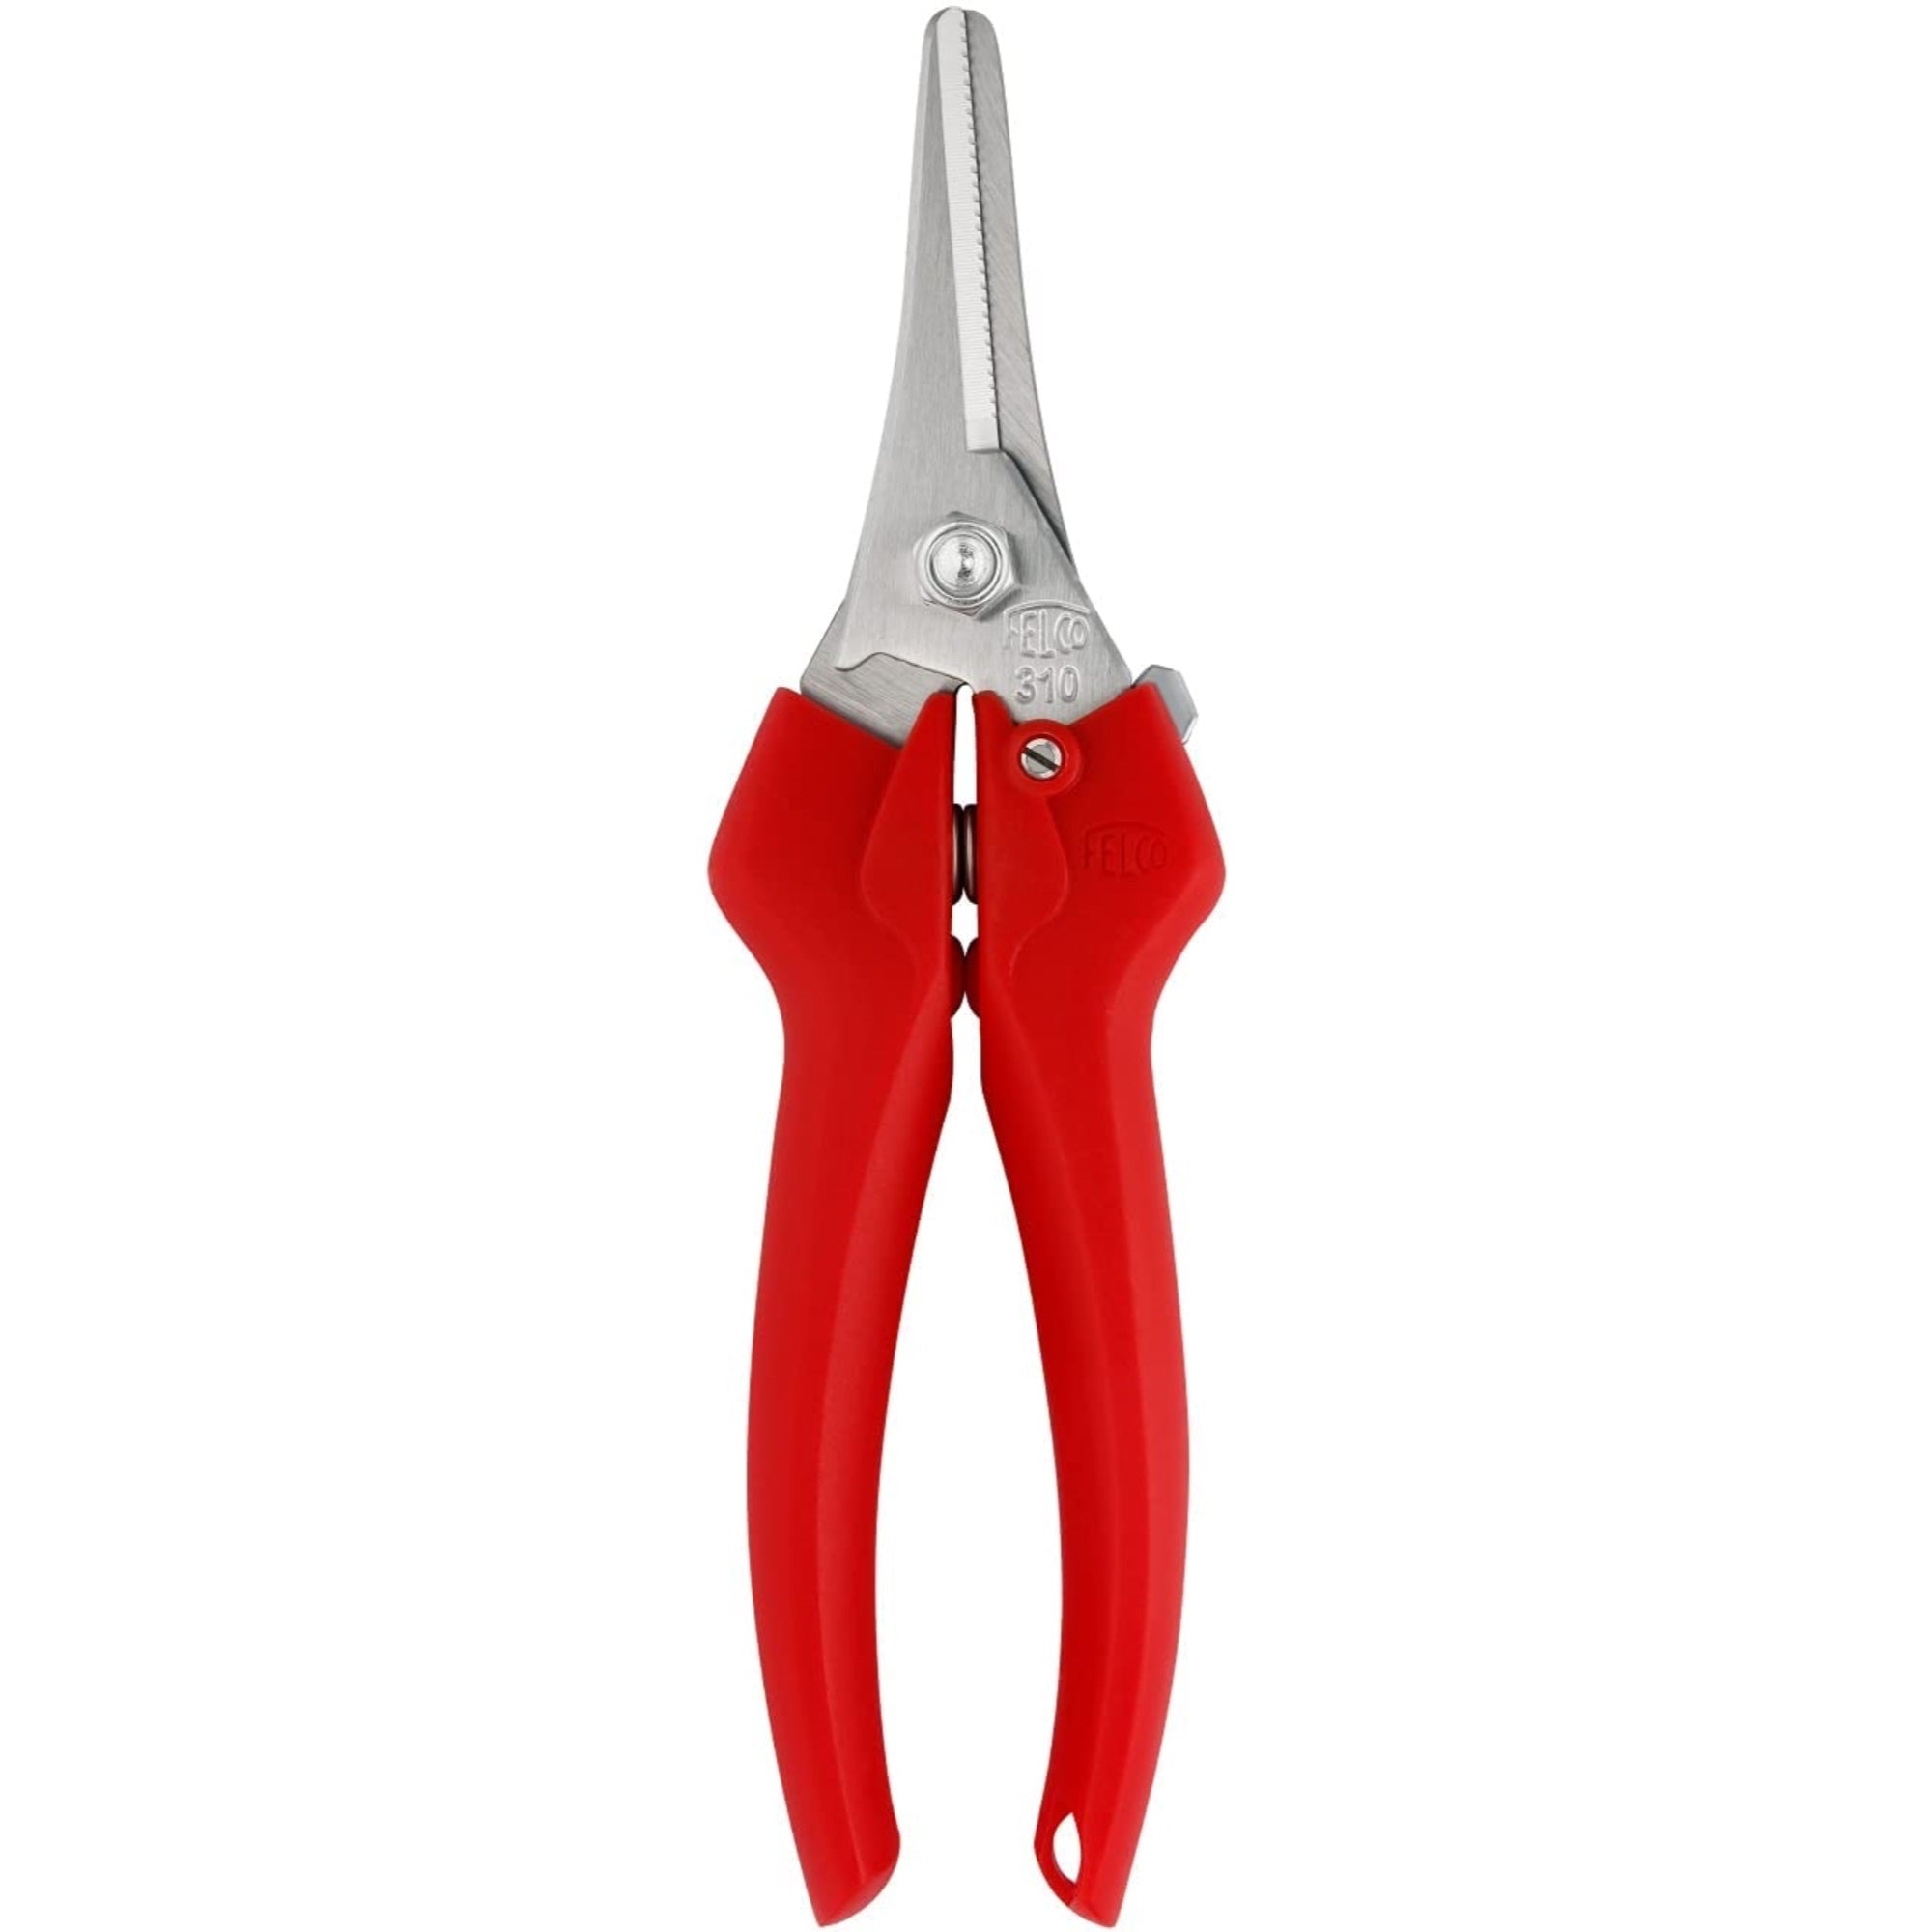 Felco Bypass Fine Nose Picking and Trimming Snip, 13"